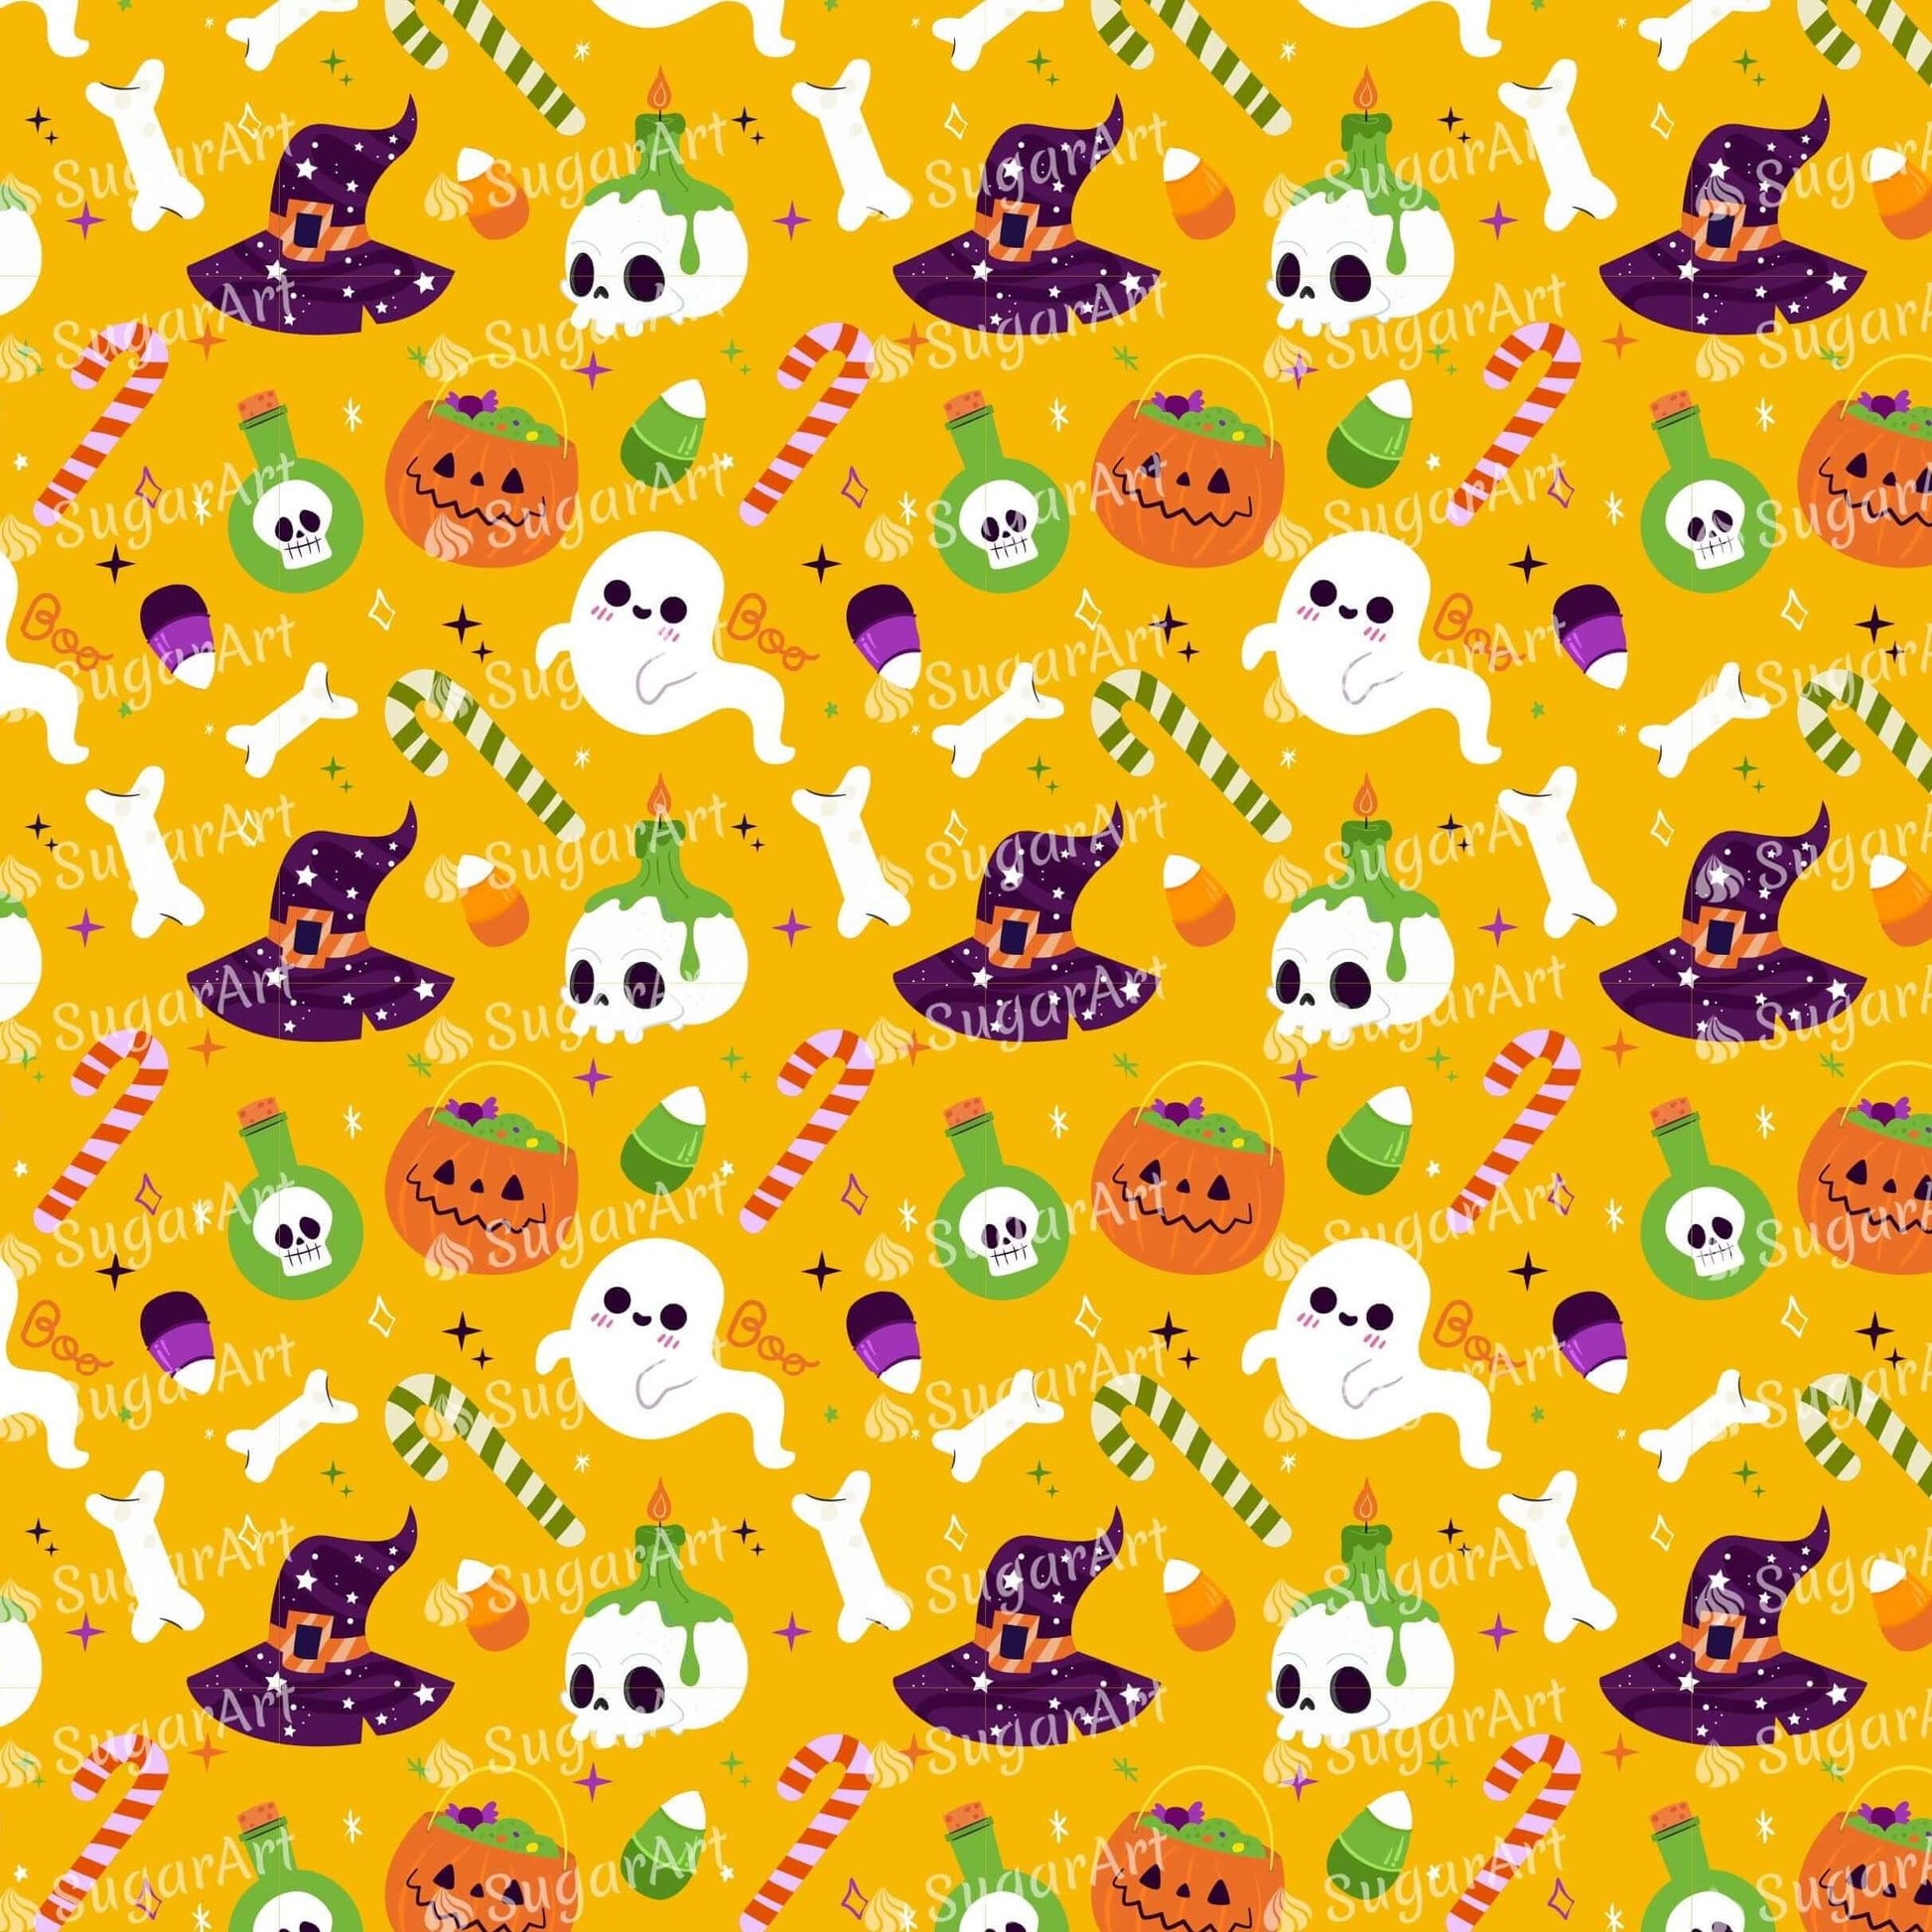 Chocolate Transfer Sheet (Halloween) Edible for Decorations A4 Size